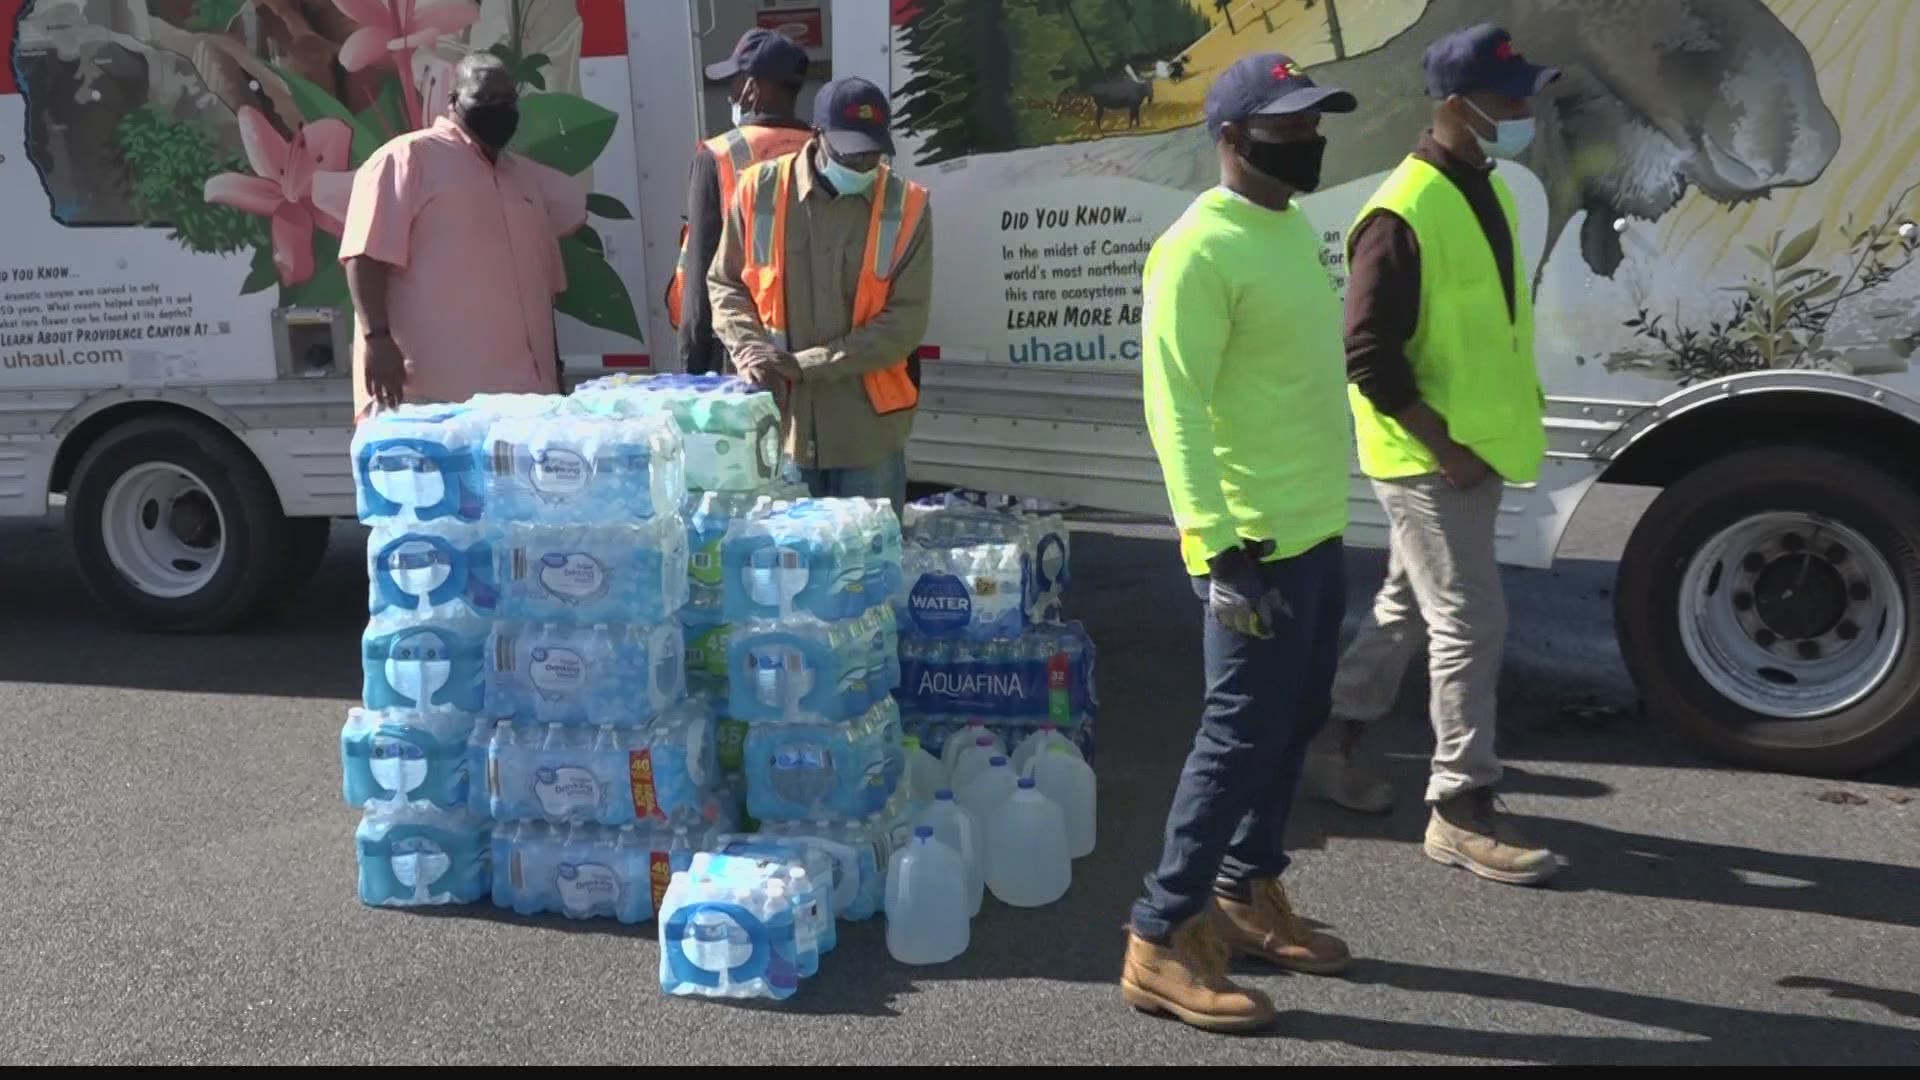 Oakwood University Church is taking up water bottle donations to send to Houston, Texas.